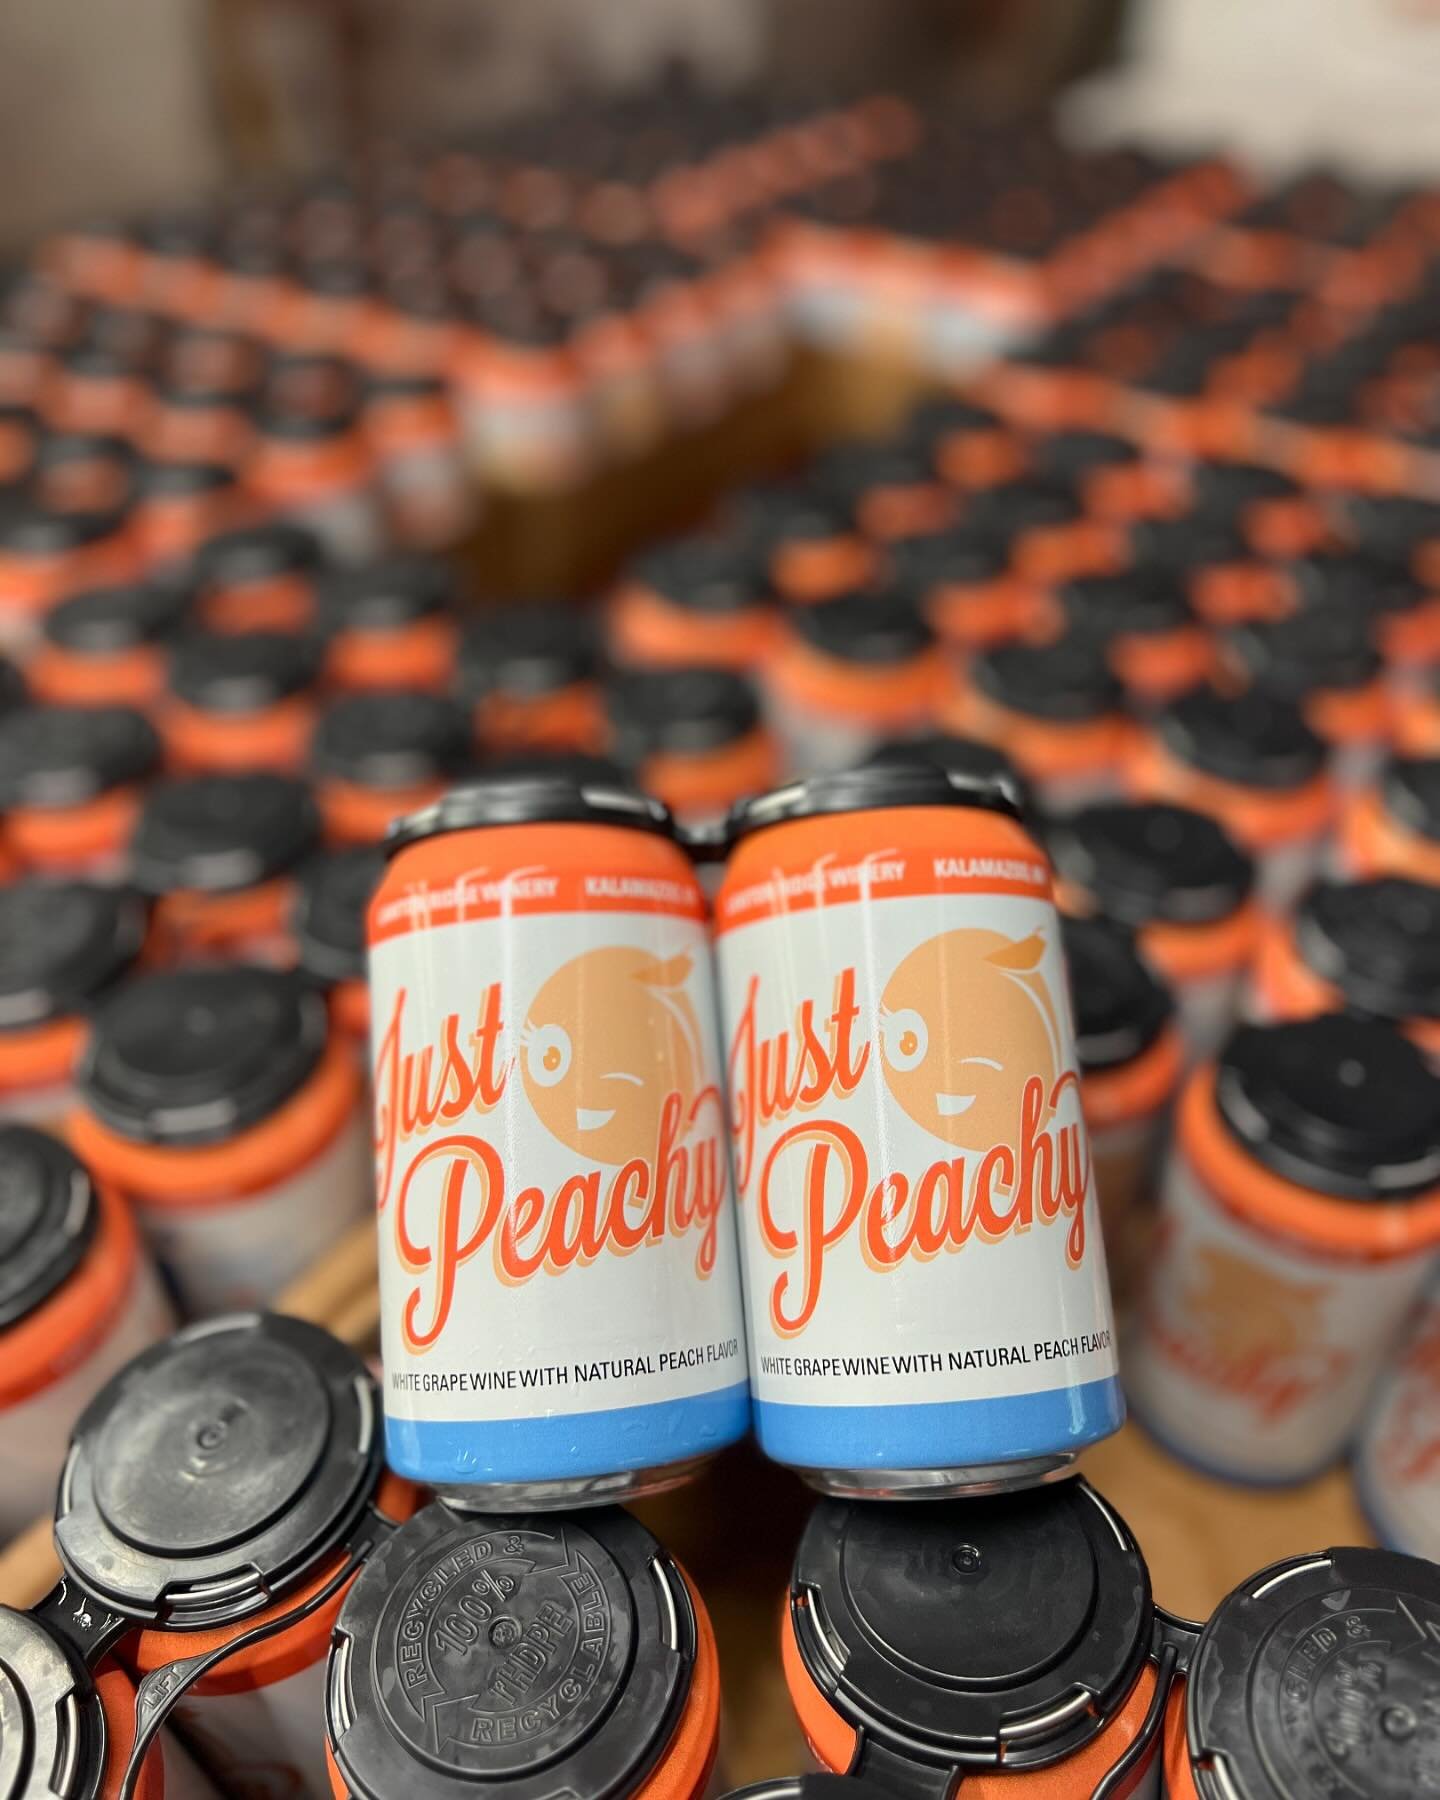 Just Peachy cans are back! These 12 oz cans are the equivalent of two glasses of wine. Cans are ideal for wherever your Michigan summer adventures take you, whether it&rsquo;s the lake or the trails. Now available in the tasting room and at both @kal